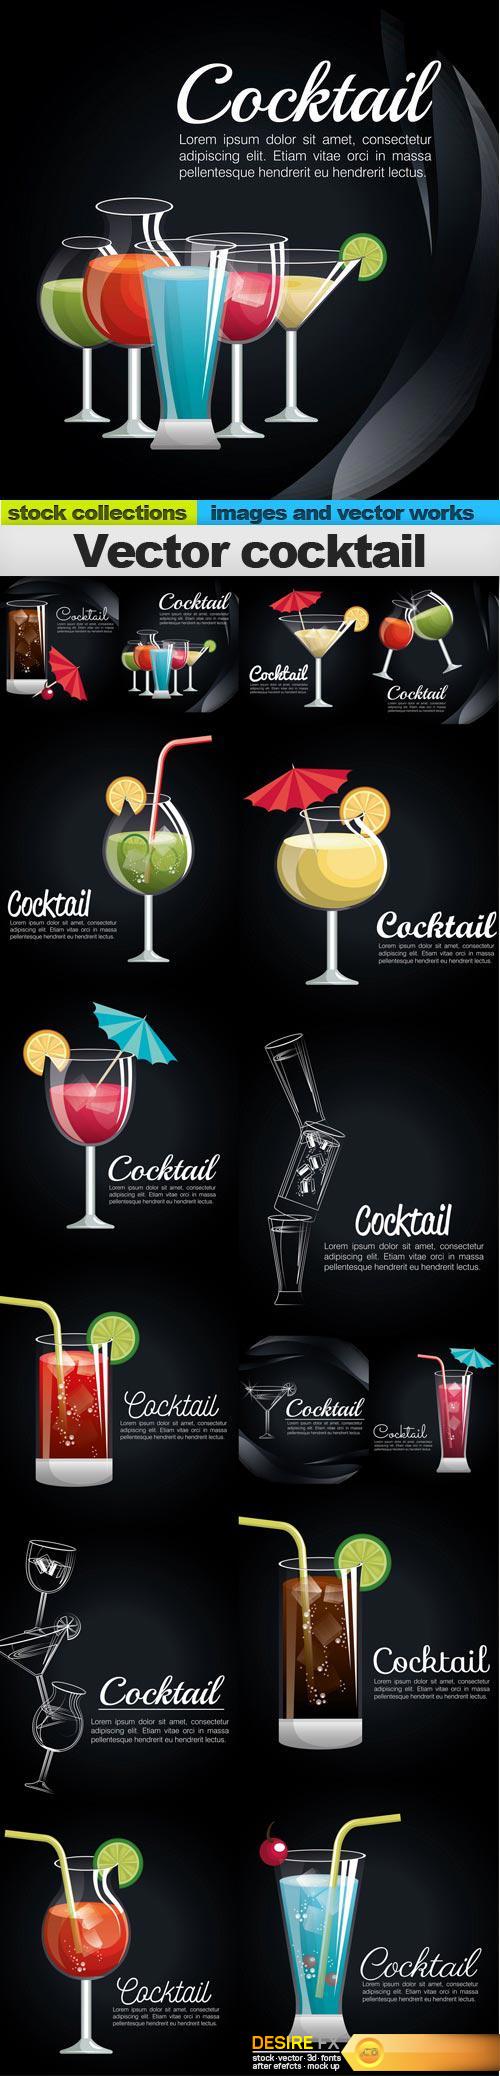 Vector cocktail, 15 x EPS